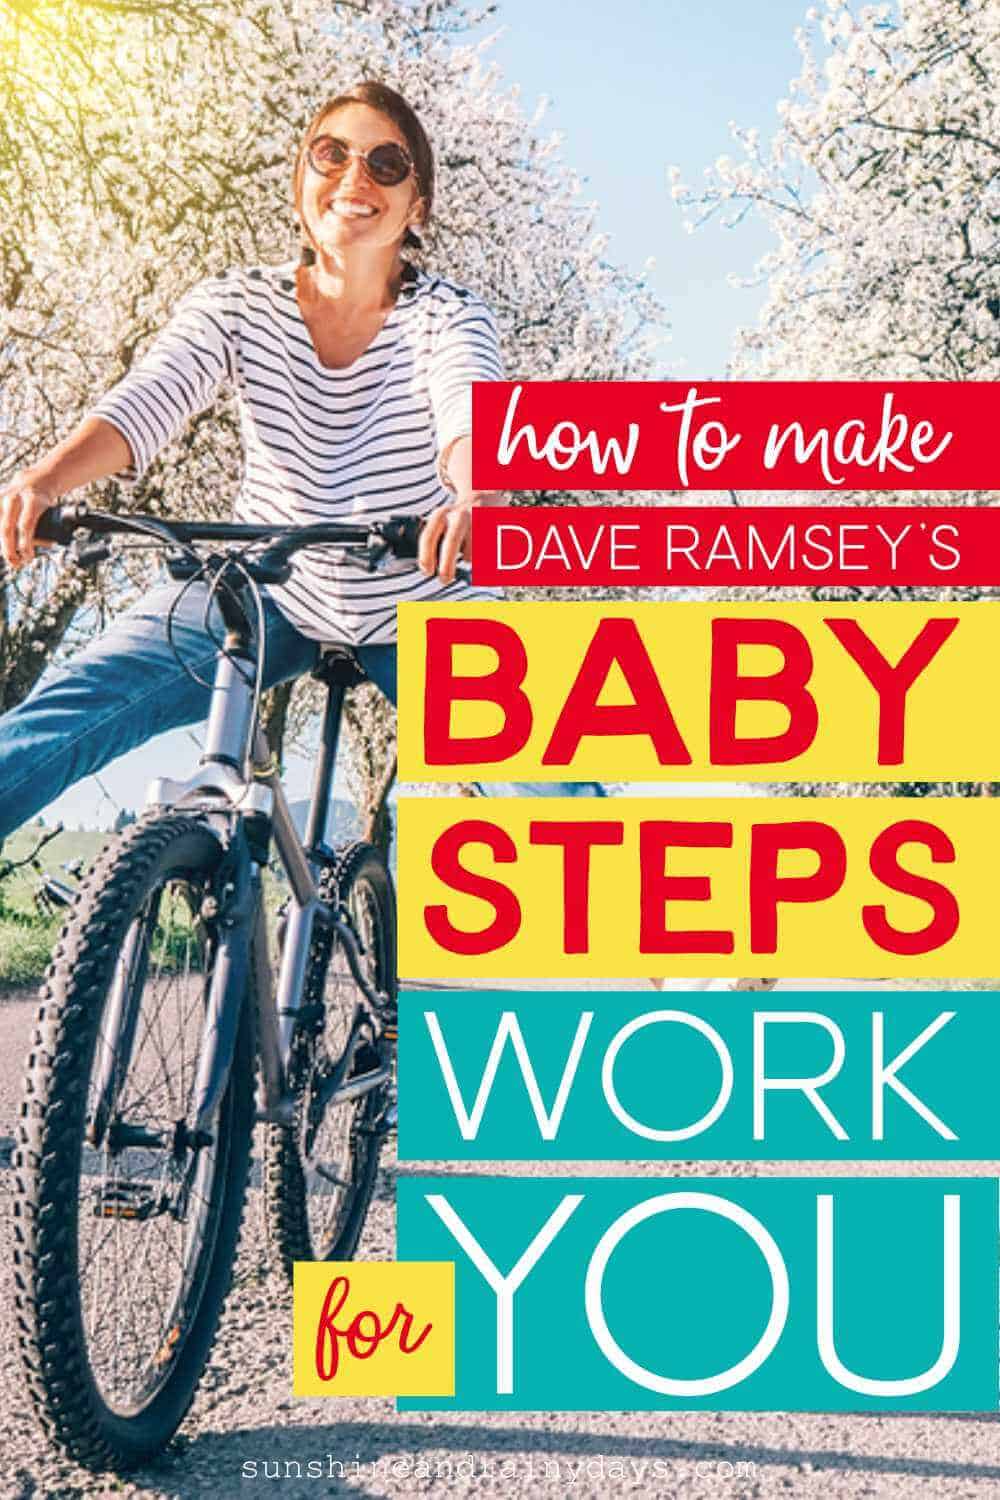 Girl on bike with the words: How To Make Dave Ramsey's Baby Steps Work For You